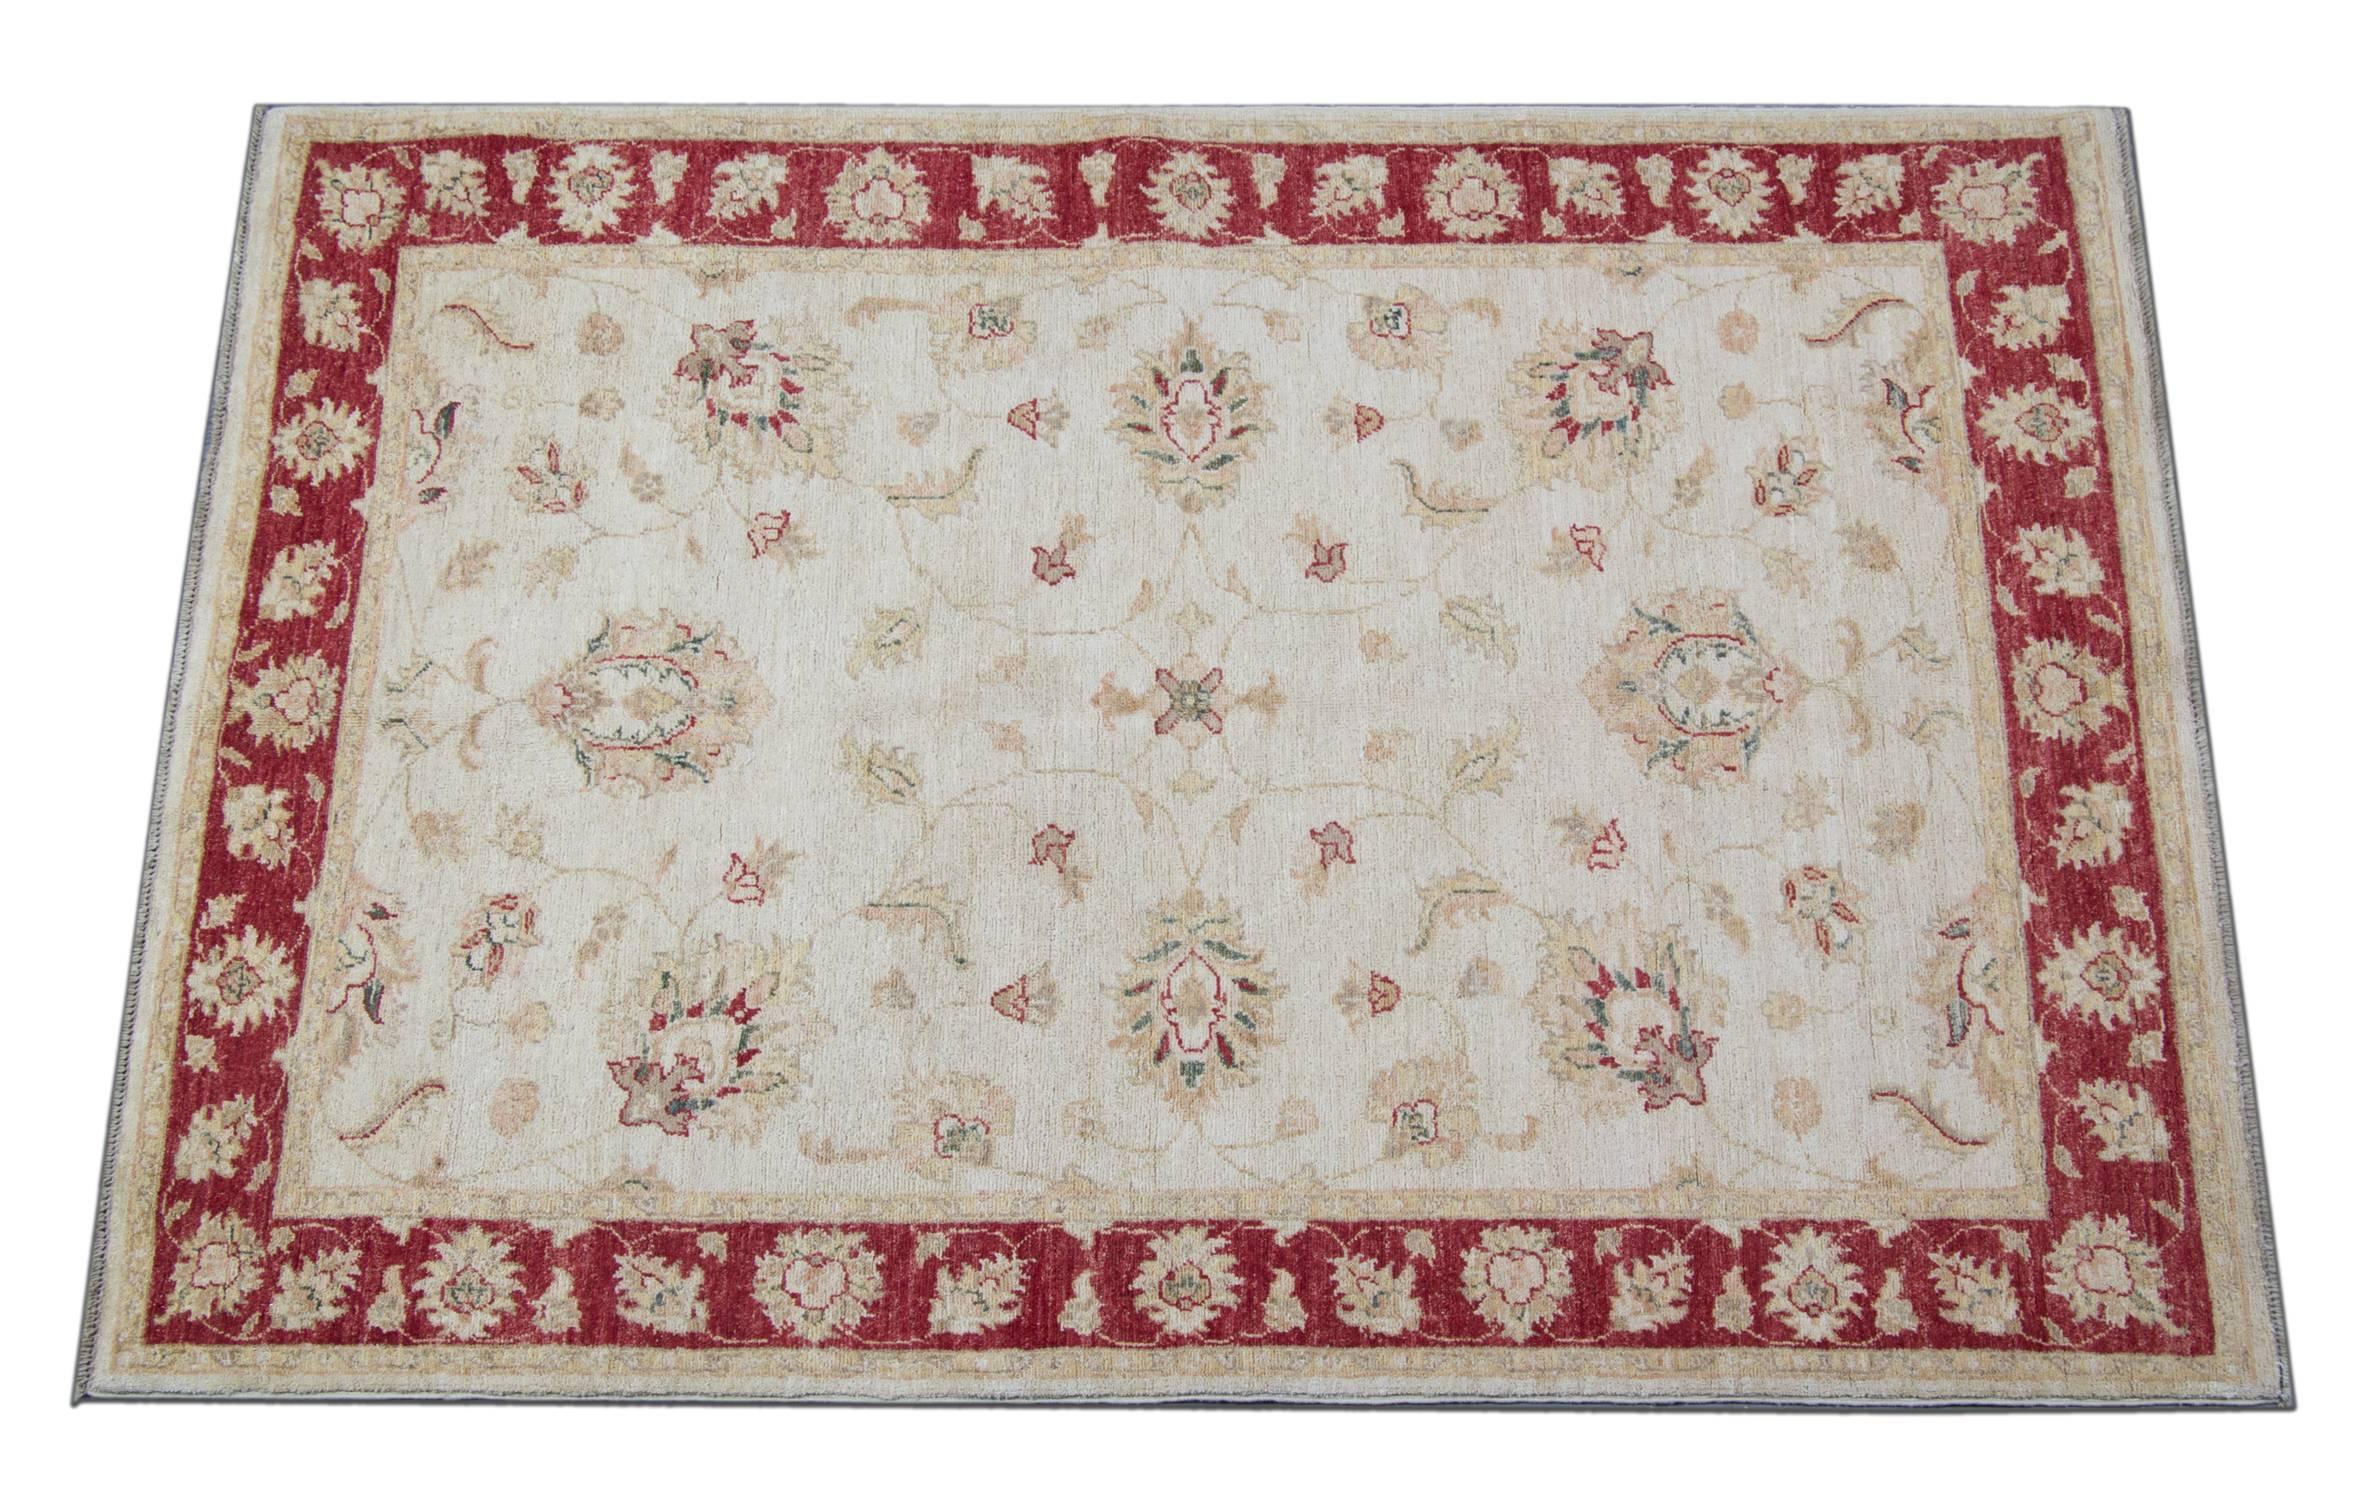 This handmade rug golden-white carpet with a magnificent red border is a Ziegler Sultanabad woven rug made on our looms by our master weavers in Afghanistan. These handmade rugs are woven with all-natural veg dyes and all handspun wool. The large